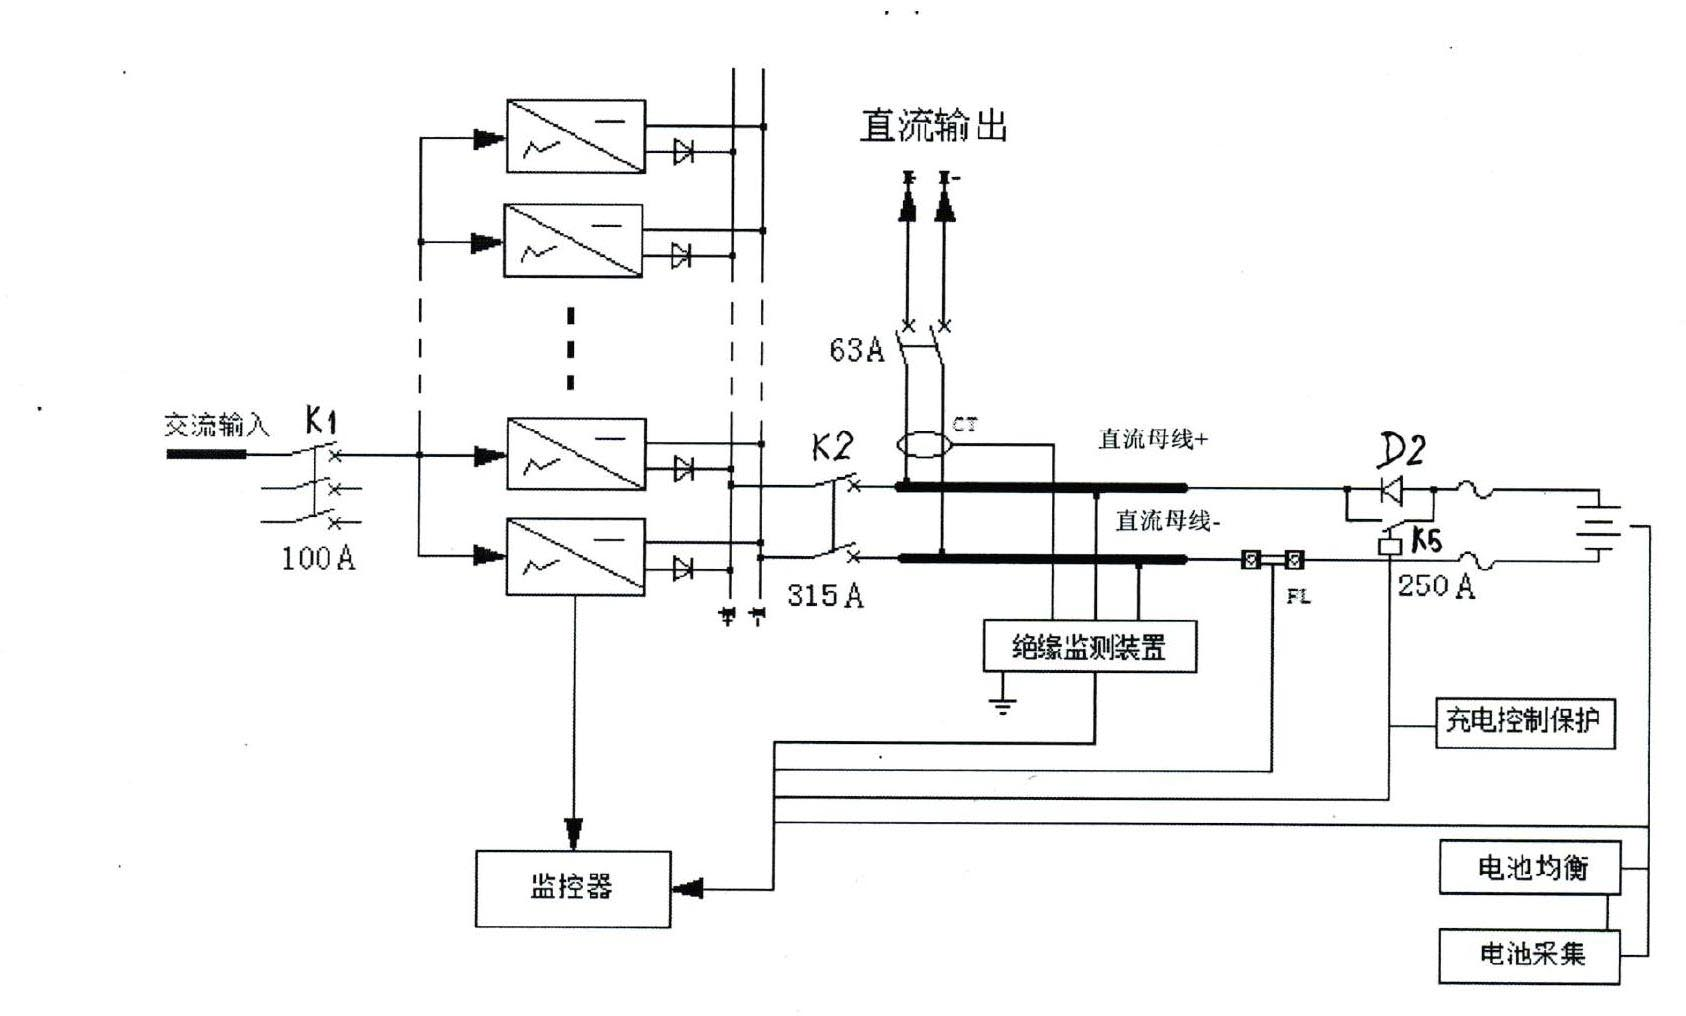 Non-floating charging type substation direct current power supply system based on iron lithium battery